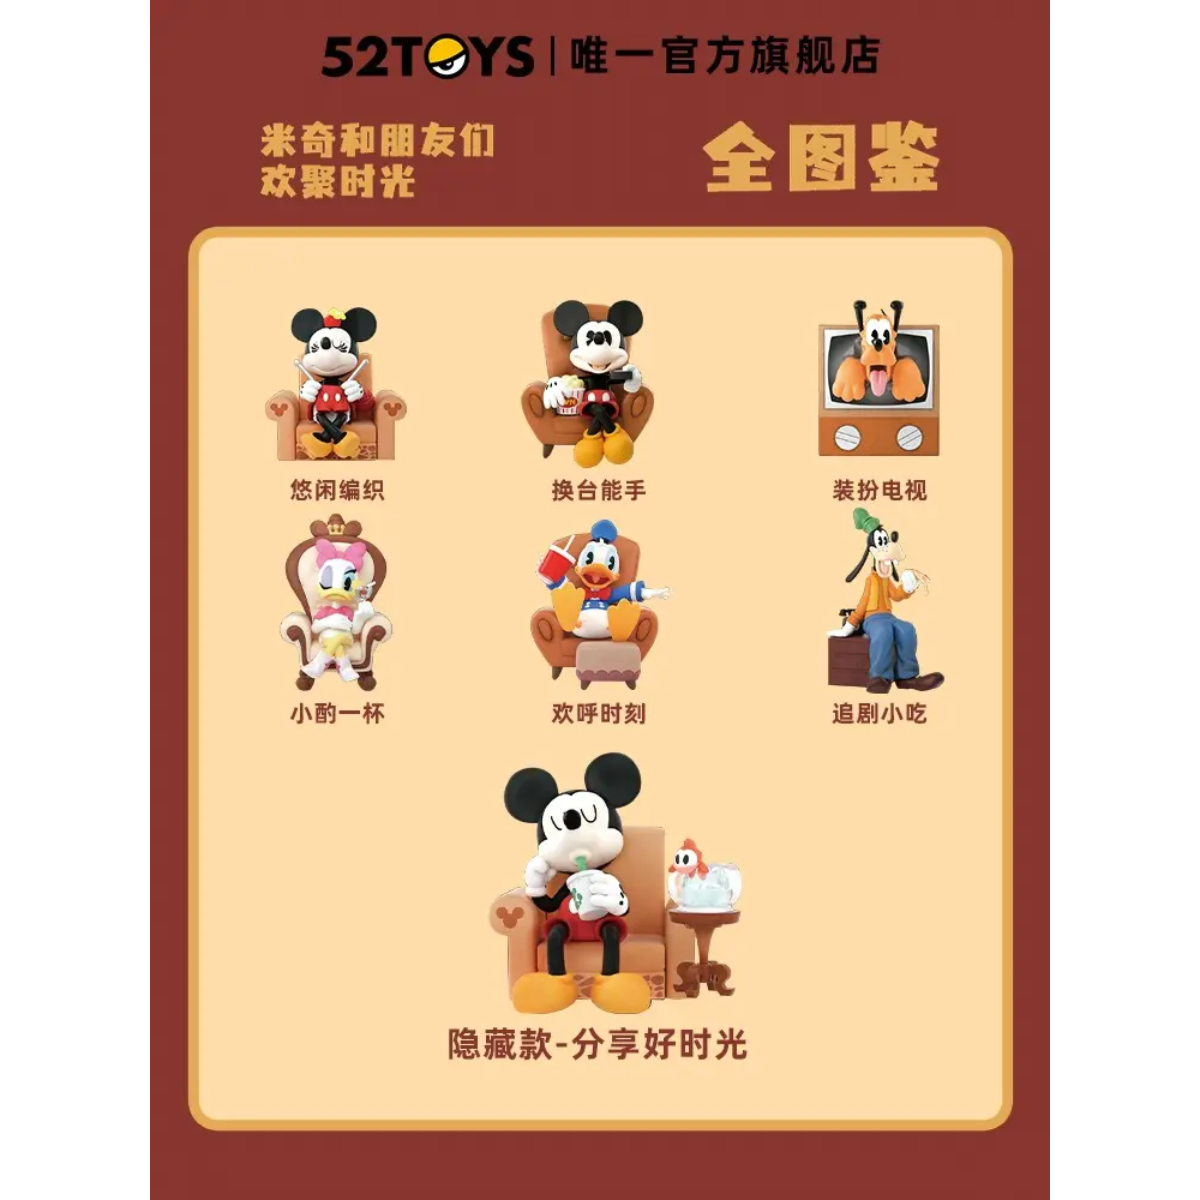 52Toys x Mickey and Friends Happy Gathering Series-Single Box (Random)-52Toys-Ace Cards & Collectibles